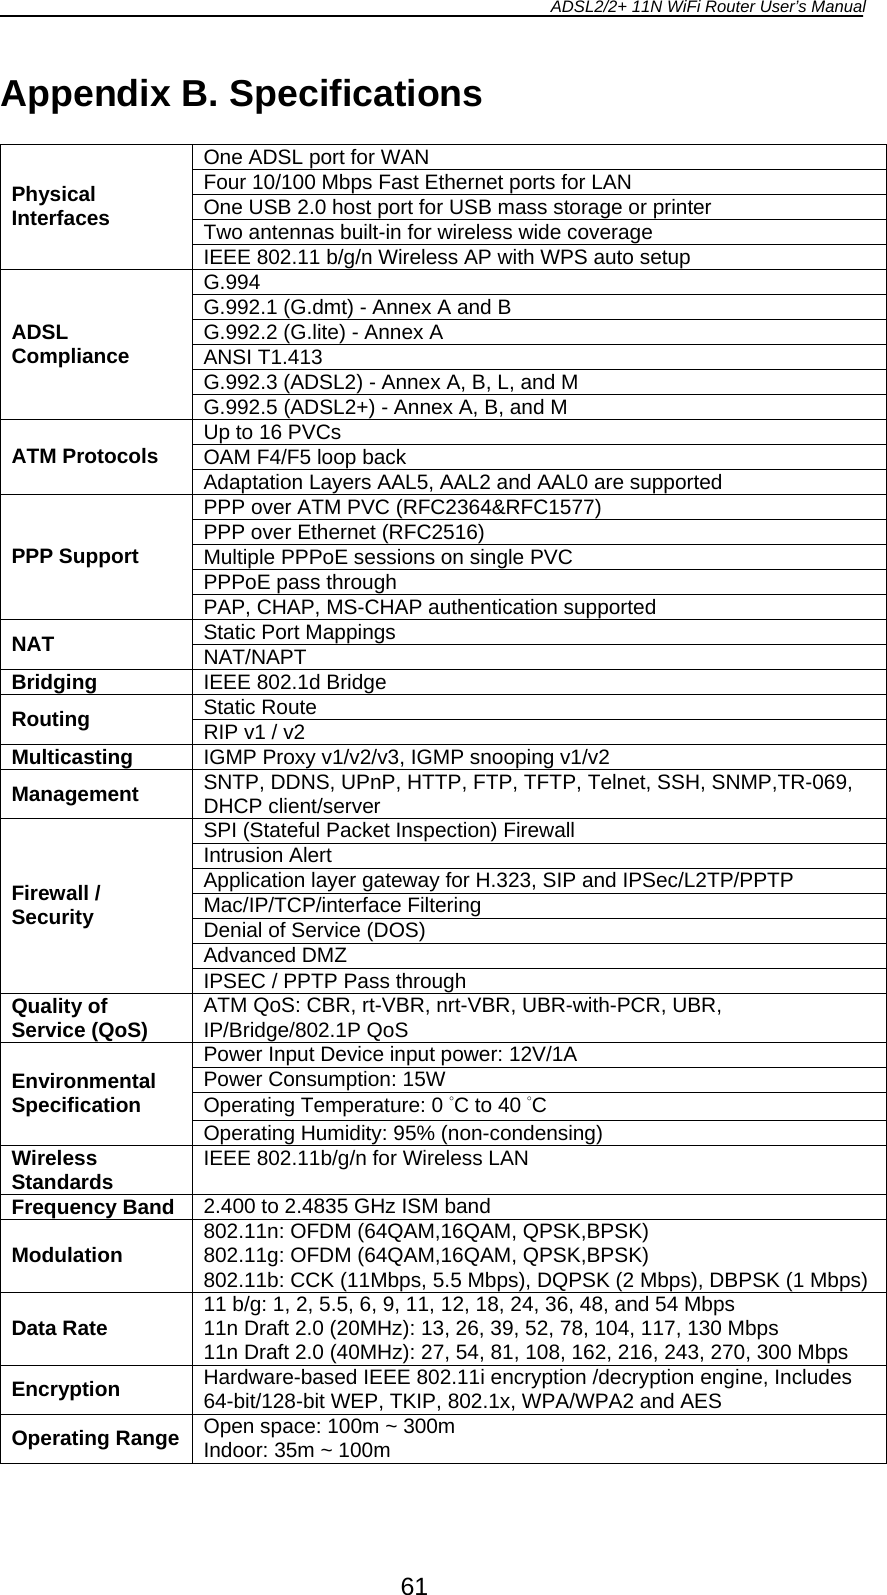 ADSL2/2+ 11N WiFi Router User’s Manual  61 Appendix B. Specifications  One ADSL port for WAN Four 10/100 Mbps Fast Ethernet ports for LAN One USB 2.0 host port for USB mass storage or printer Two antennas built-in for wireless wide coverage Physical Interfaces IEEE 802.11 b/g/n Wireless AP with WPS auto setup G.994 G.992.1 (G.dmt) - Annex A and B G.992.2 (G.lite) - Annex A ANSI T1.413 G.992.3 (ADSL2) - Annex A, B, L, and M ADSL Compliance G.992.5 (ADSL2+) - Annex A, B, and M Up to 16 PVCs OAM F4/F5 loop back ATM Protocols  Adaptation Layers AAL5, AAL2 and AAL0 are supported PPP over ATM PVC (RFC2364&amp;RFC1577) PPP over Ethernet (RFC2516)  Multiple PPPoE sessions on single PVC PPPoE pass through PPP Support  PAP, CHAP, MS-CHAP authentication supported Static Port Mappings NAT  NAT/NAPT Bridging  IEEE 802.1d Bridge Static Route Routing  RIP v1 / v2 Multicasting  IGMP Proxy v1/v2/v3, IGMP snooping v1/v2 Management  SNTP, DDNS, UPnP, HTTP, FTP, TFTP, Telnet, SSH, SNMP,TR-069, DHCP client/server SPI (Stateful Packet Inspection) Firewall Intrusion Alert Application layer gateway for H.323, SIP and IPSec/L2TP/PPTP Mac/IP/TCP/interface Filtering Denial of Service (DOS) Advanced DMZ Firewall / Security IPSEC / PPTP Pass through Quality of Service (QoS)  ATM QoS: CBR, rt-VBR, nrt-VBR, UBR-with-PCR, UBR, IP/Bridge/802.1P QoS Power Input Device input power: 12V/1A Power Consumption: 15W Operating Temperature: 0 °C to 40 °C Environmental Specification Operating Humidity: 95% (non-condensing) Wireless Standards  IEEE 802.11b/g/n for Wireless LAN Frequency Band  2.400 to 2.4835 GHz ISM band Modulation  802.11n: OFDM (64QAM,16QAM, QPSK,BPSK) 802.11g: OFDM (64QAM,16QAM, QPSK,BPSK) 802.11b: CCK (11Mbps, 5.5 Mbps), DQPSK (2 Mbps), DBPSK (1 Mbps)Data Rate  11 b/g: 1, 2, 5.5, 6, 9, 11, 12, 18, 24, 36, 48, and 54 Mbps 11n Draft 2.0 (20MHz): 13, 26, 39, 52, 78, 104, 117, 130 Mbps 11n Draft 2.0 (40MHz): 27, 54, 81, 108, 162, 216, 243, 270, 300 Mbps Encryption  Hardware-based IEEE 802.11i encryption /decryption engine, Includes 64-bit/128-bit WEP, TKIP, 802.1x, WPA/WPA2 and AES Operating Range Open space: 100m ~ 300m Indoor: 35m ~ 100m  